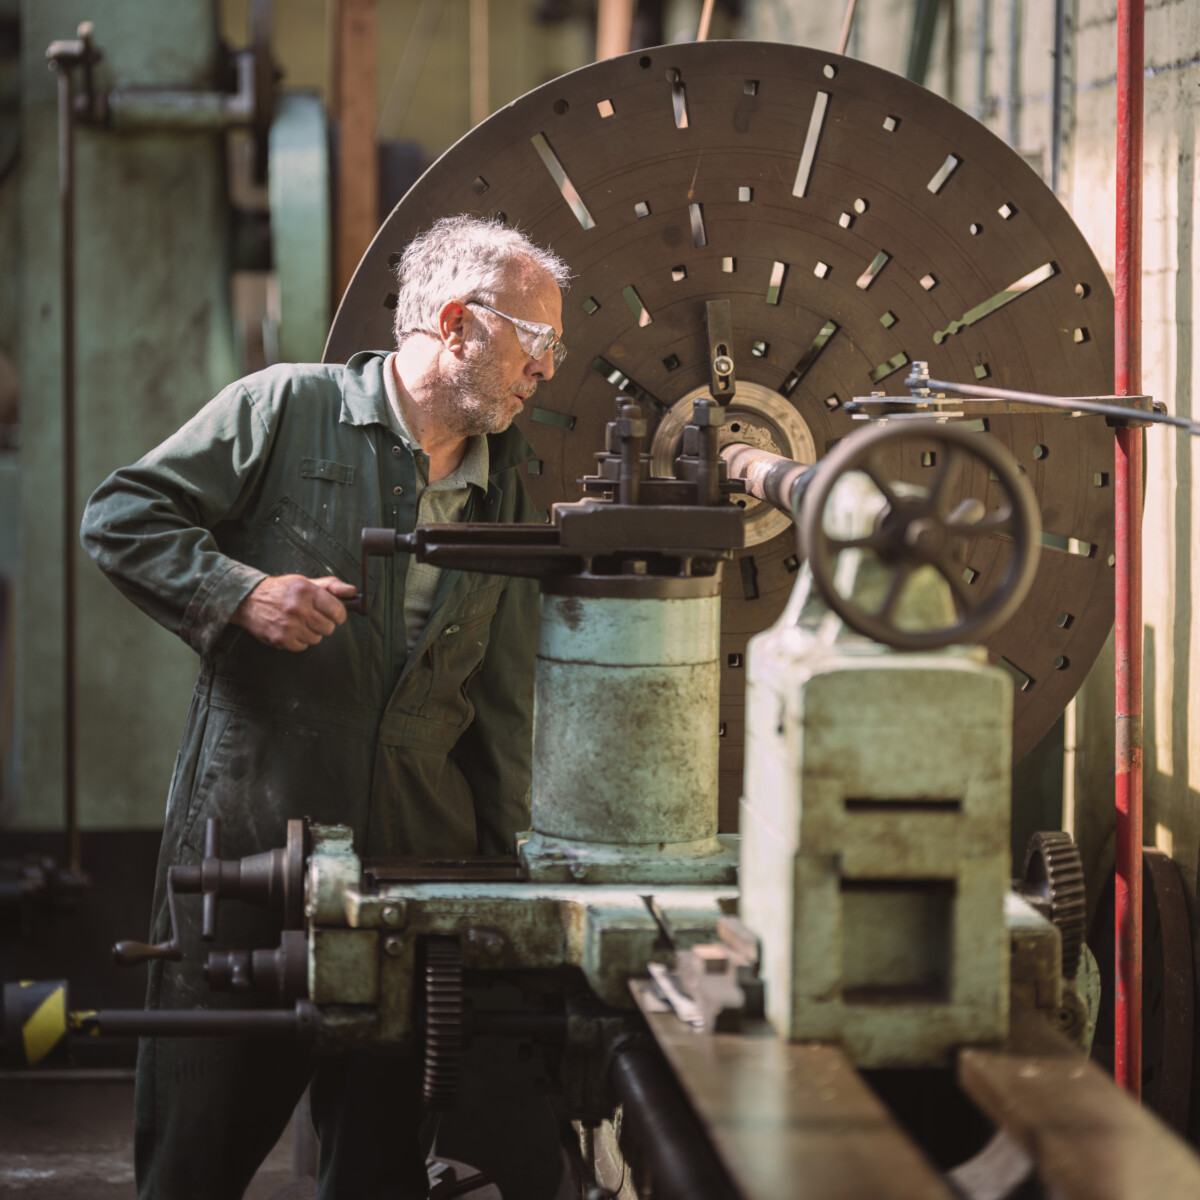 Volunteer in green boiler suit working with a lathe